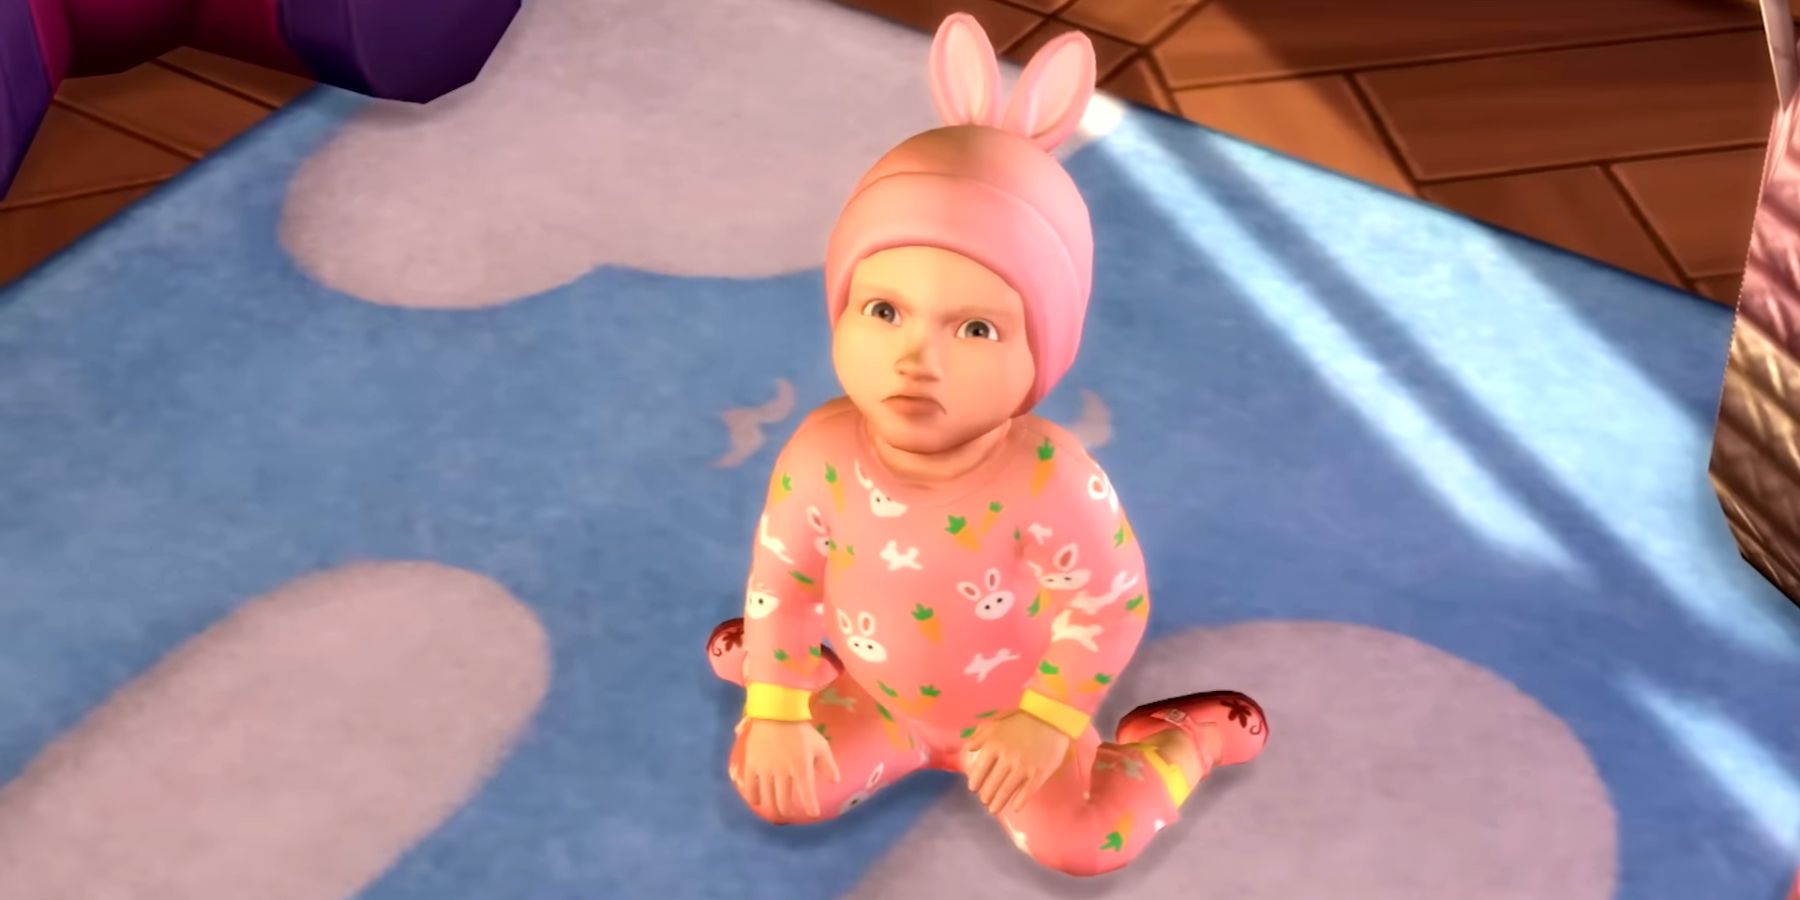 Sims 4 Infant Update: Free New Objects